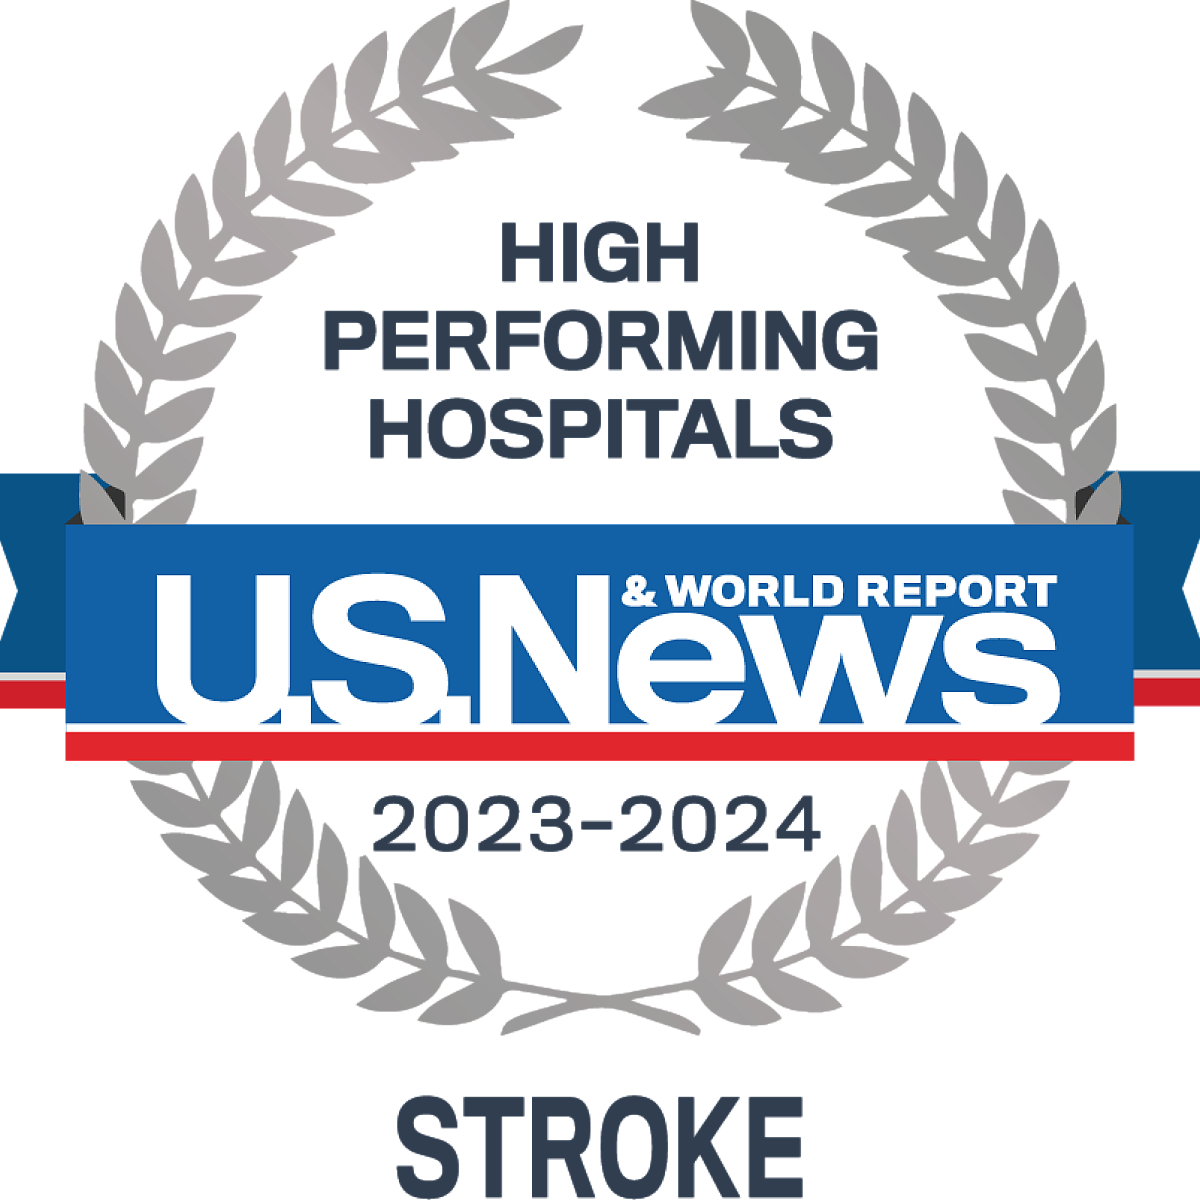 U.S. News & World Report Badge Emblem for High Performing Hospitals in Stroke Care 2023-2024